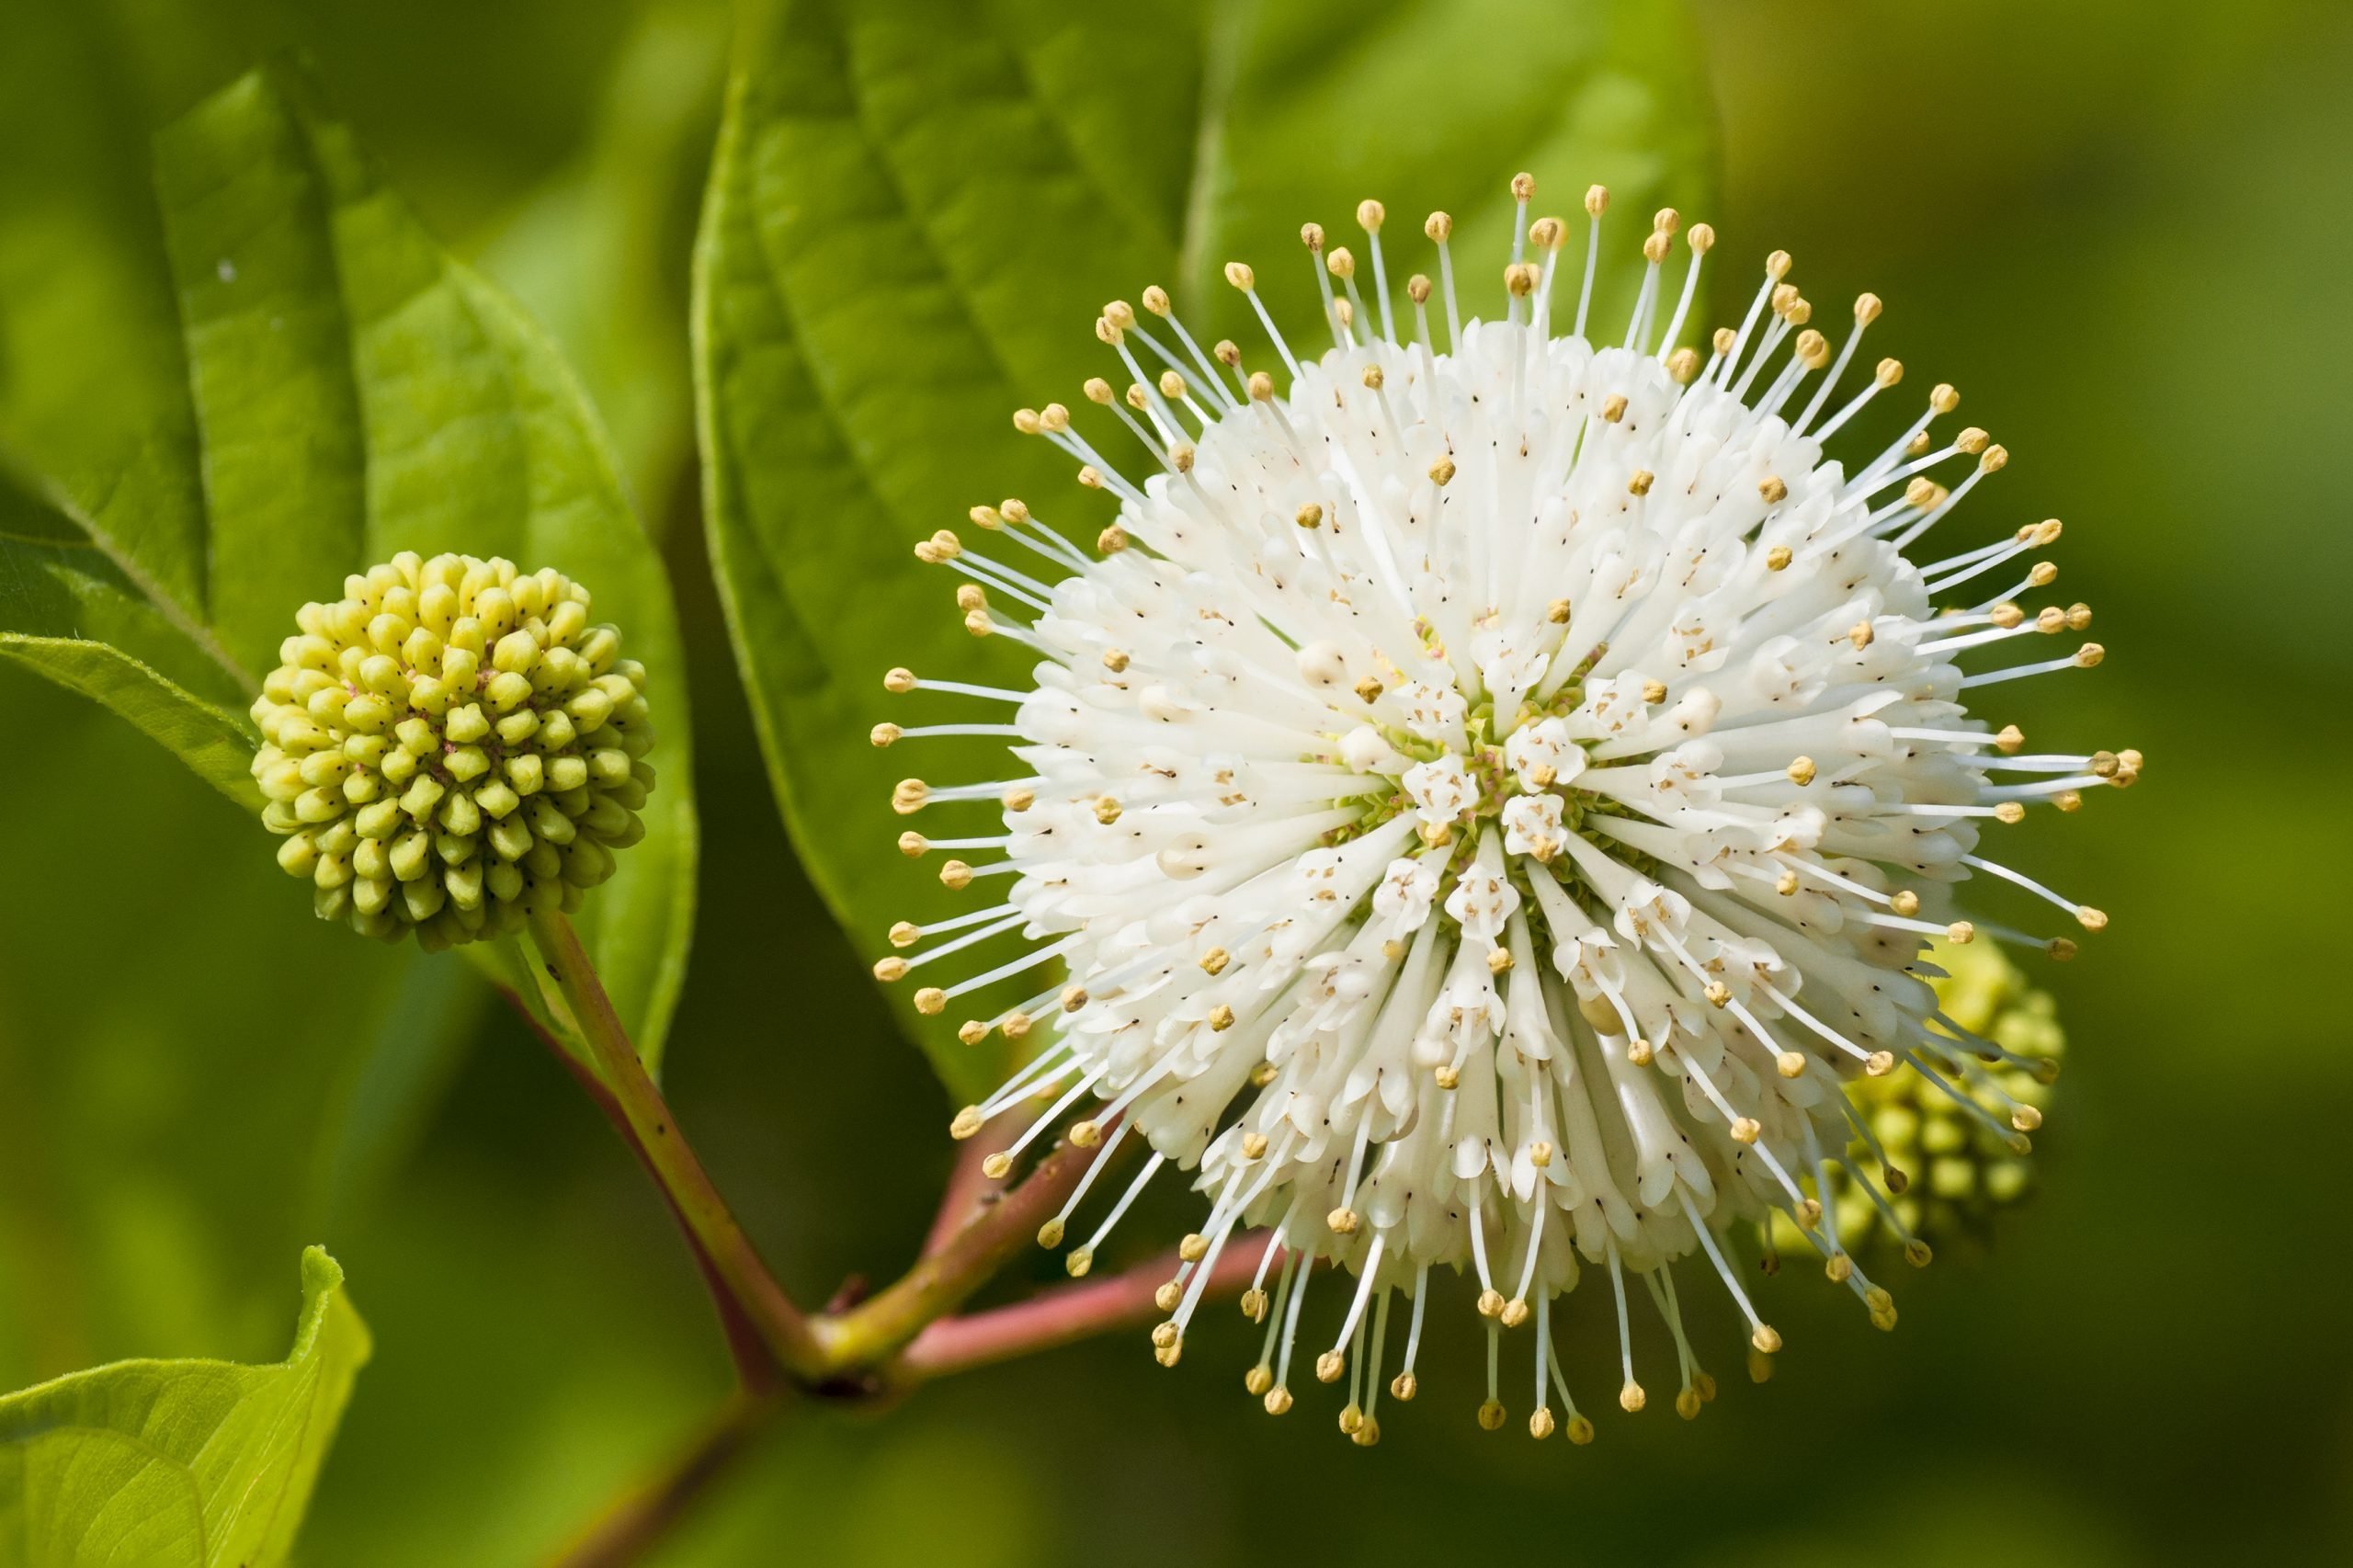 Flower or Cephalanthus occidentalis, known also as Button bush.